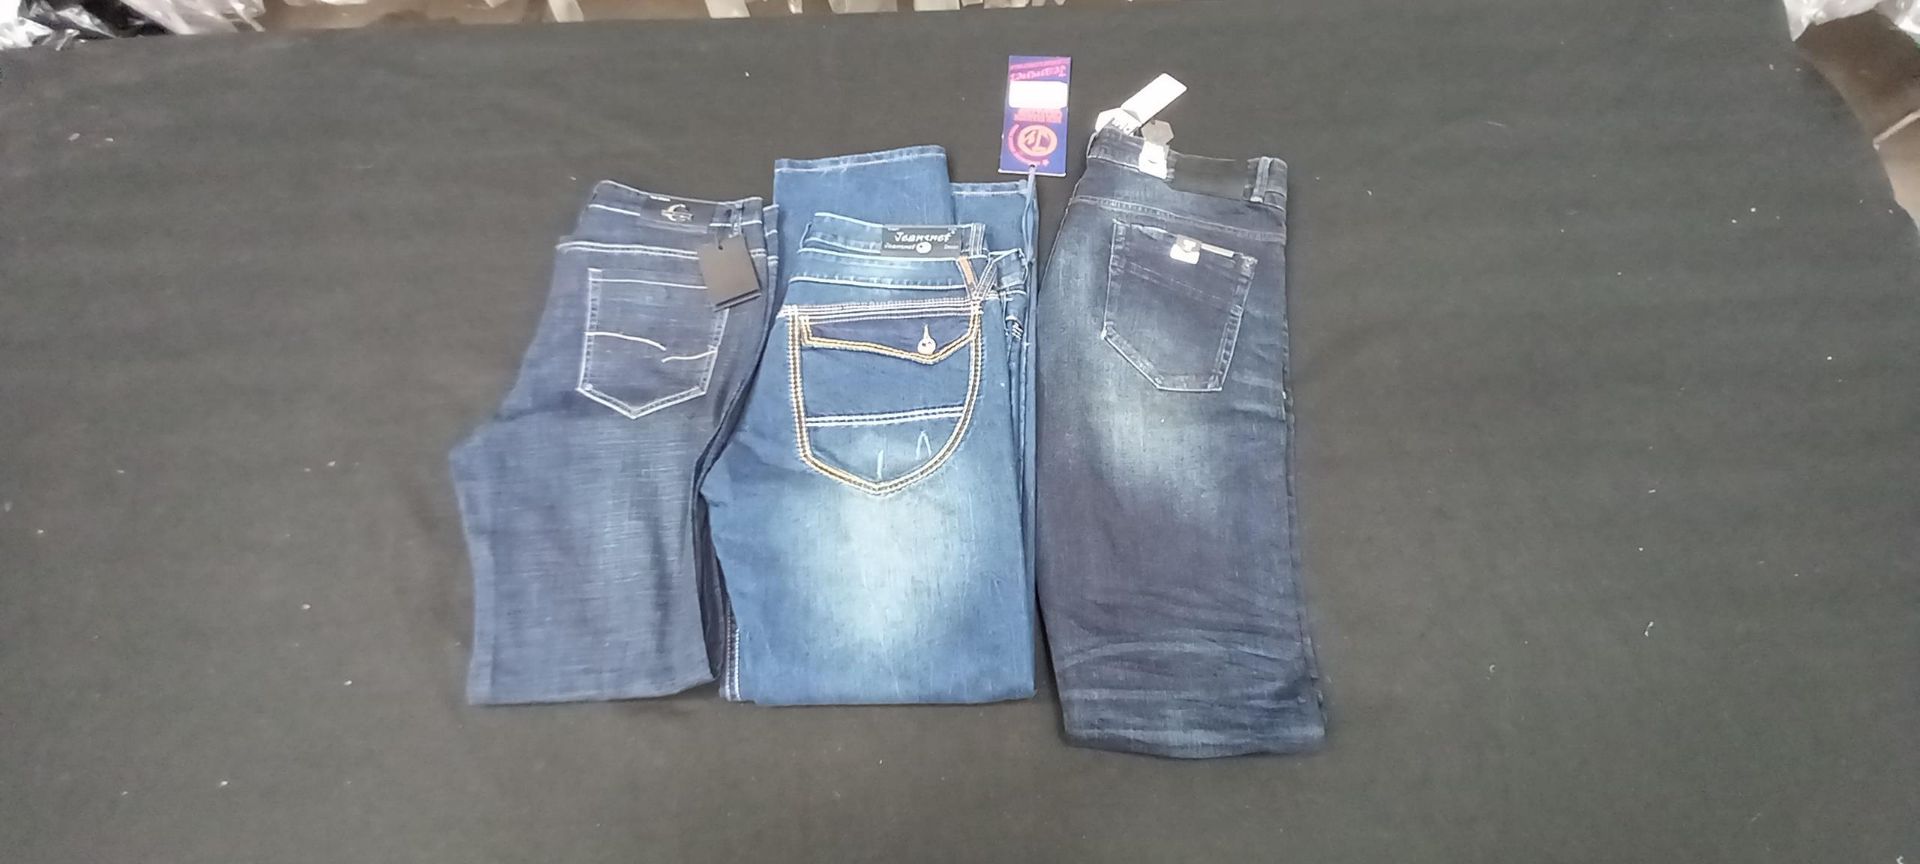 3 x Various designer jeans, 36W, Various lengths - Image 2 of 2